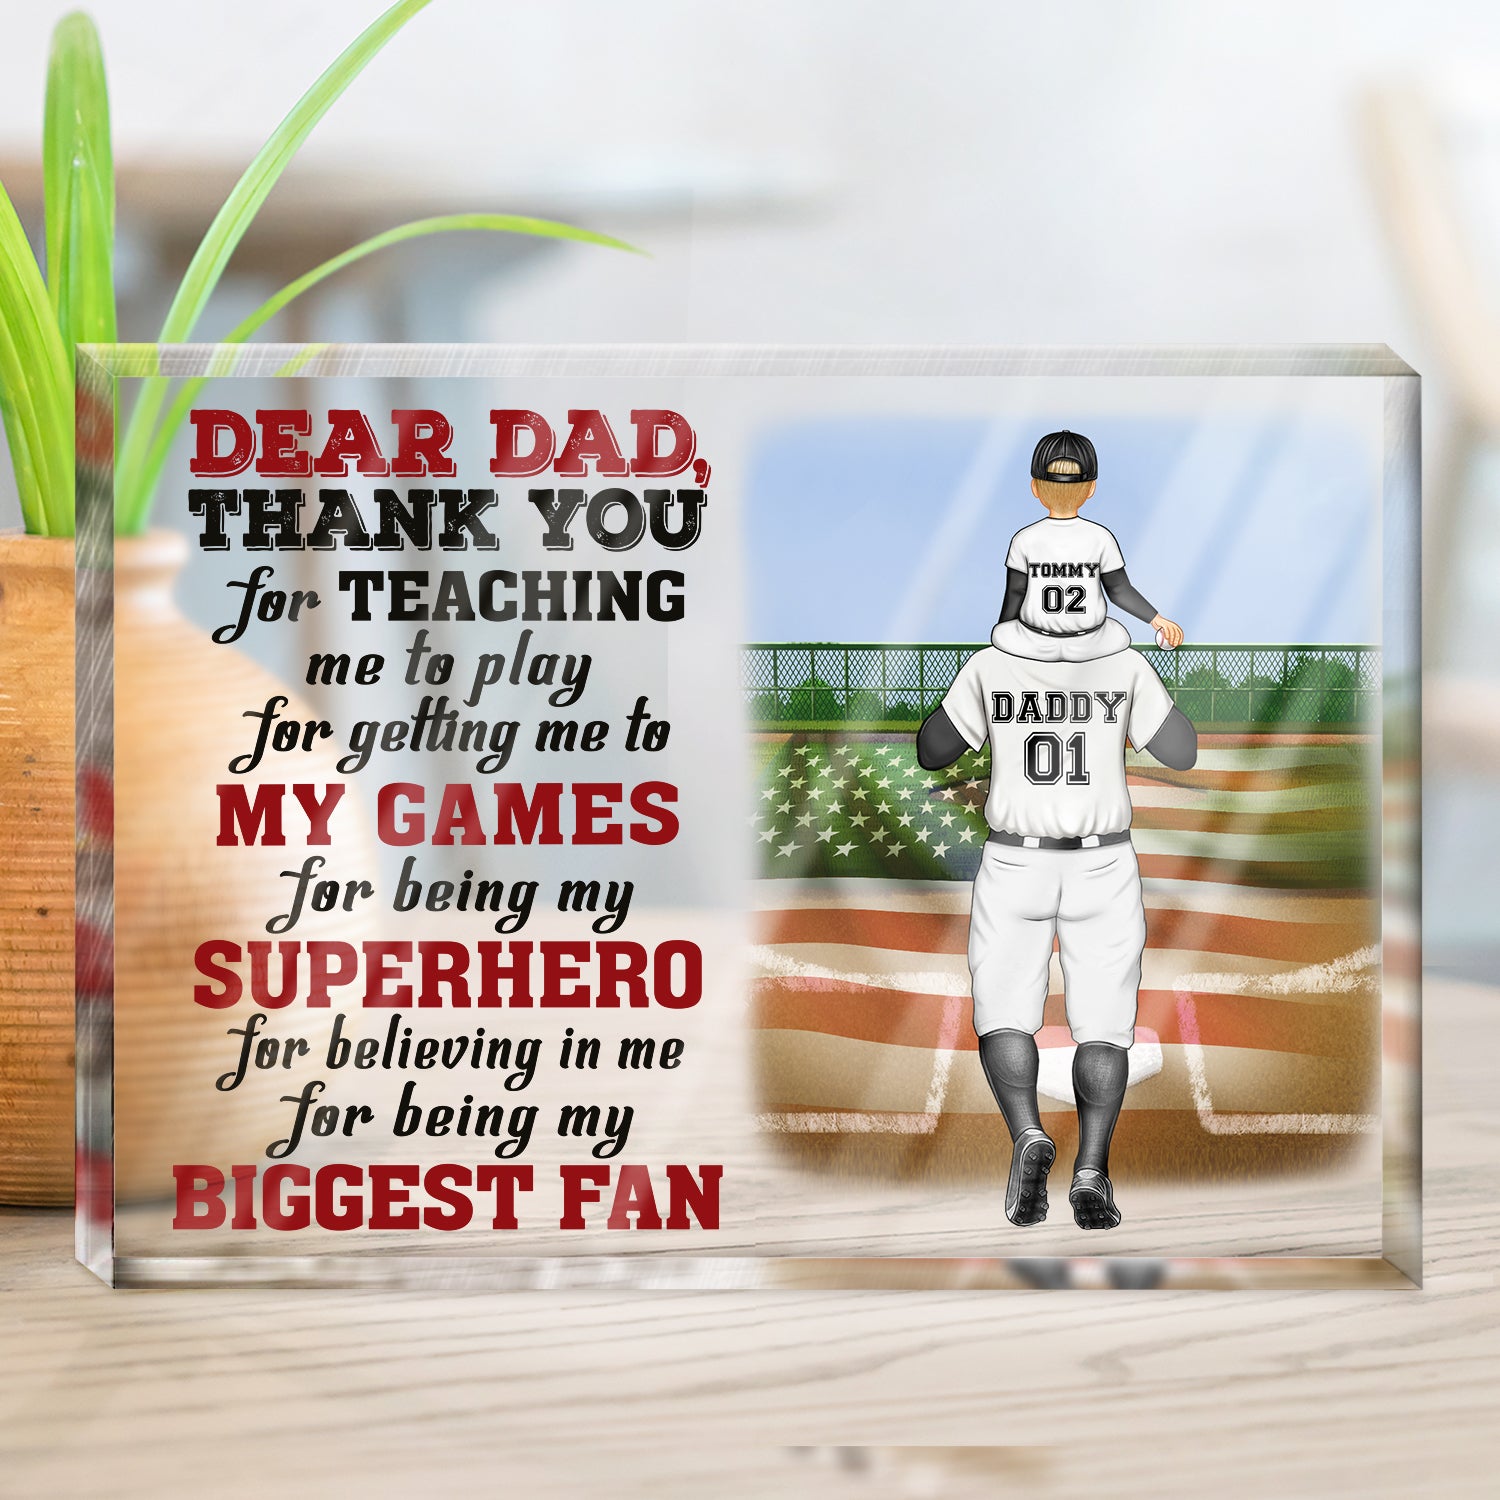 Dear Dad Thank You For Teaching Me - Birthday, Loving Gift For Baseball, Softball Fan, Father - Personalized Rectangle Shaped Acrylic Plaque